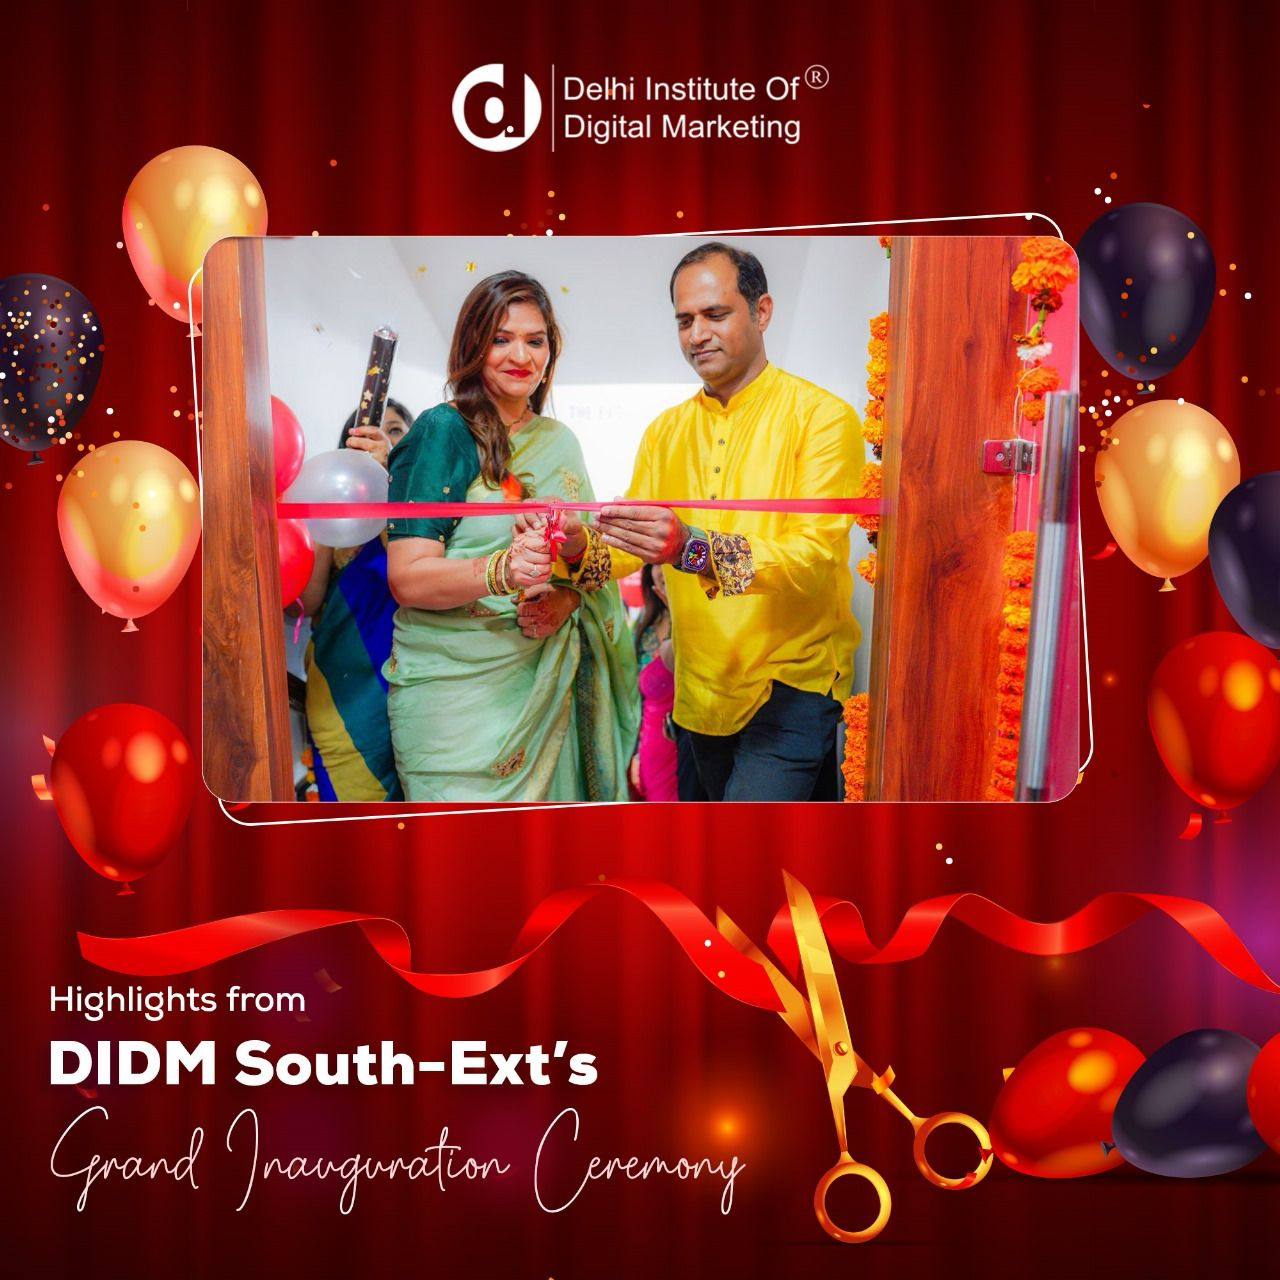 Grand Inauguration Ceremony of DIDM South Extension Branch